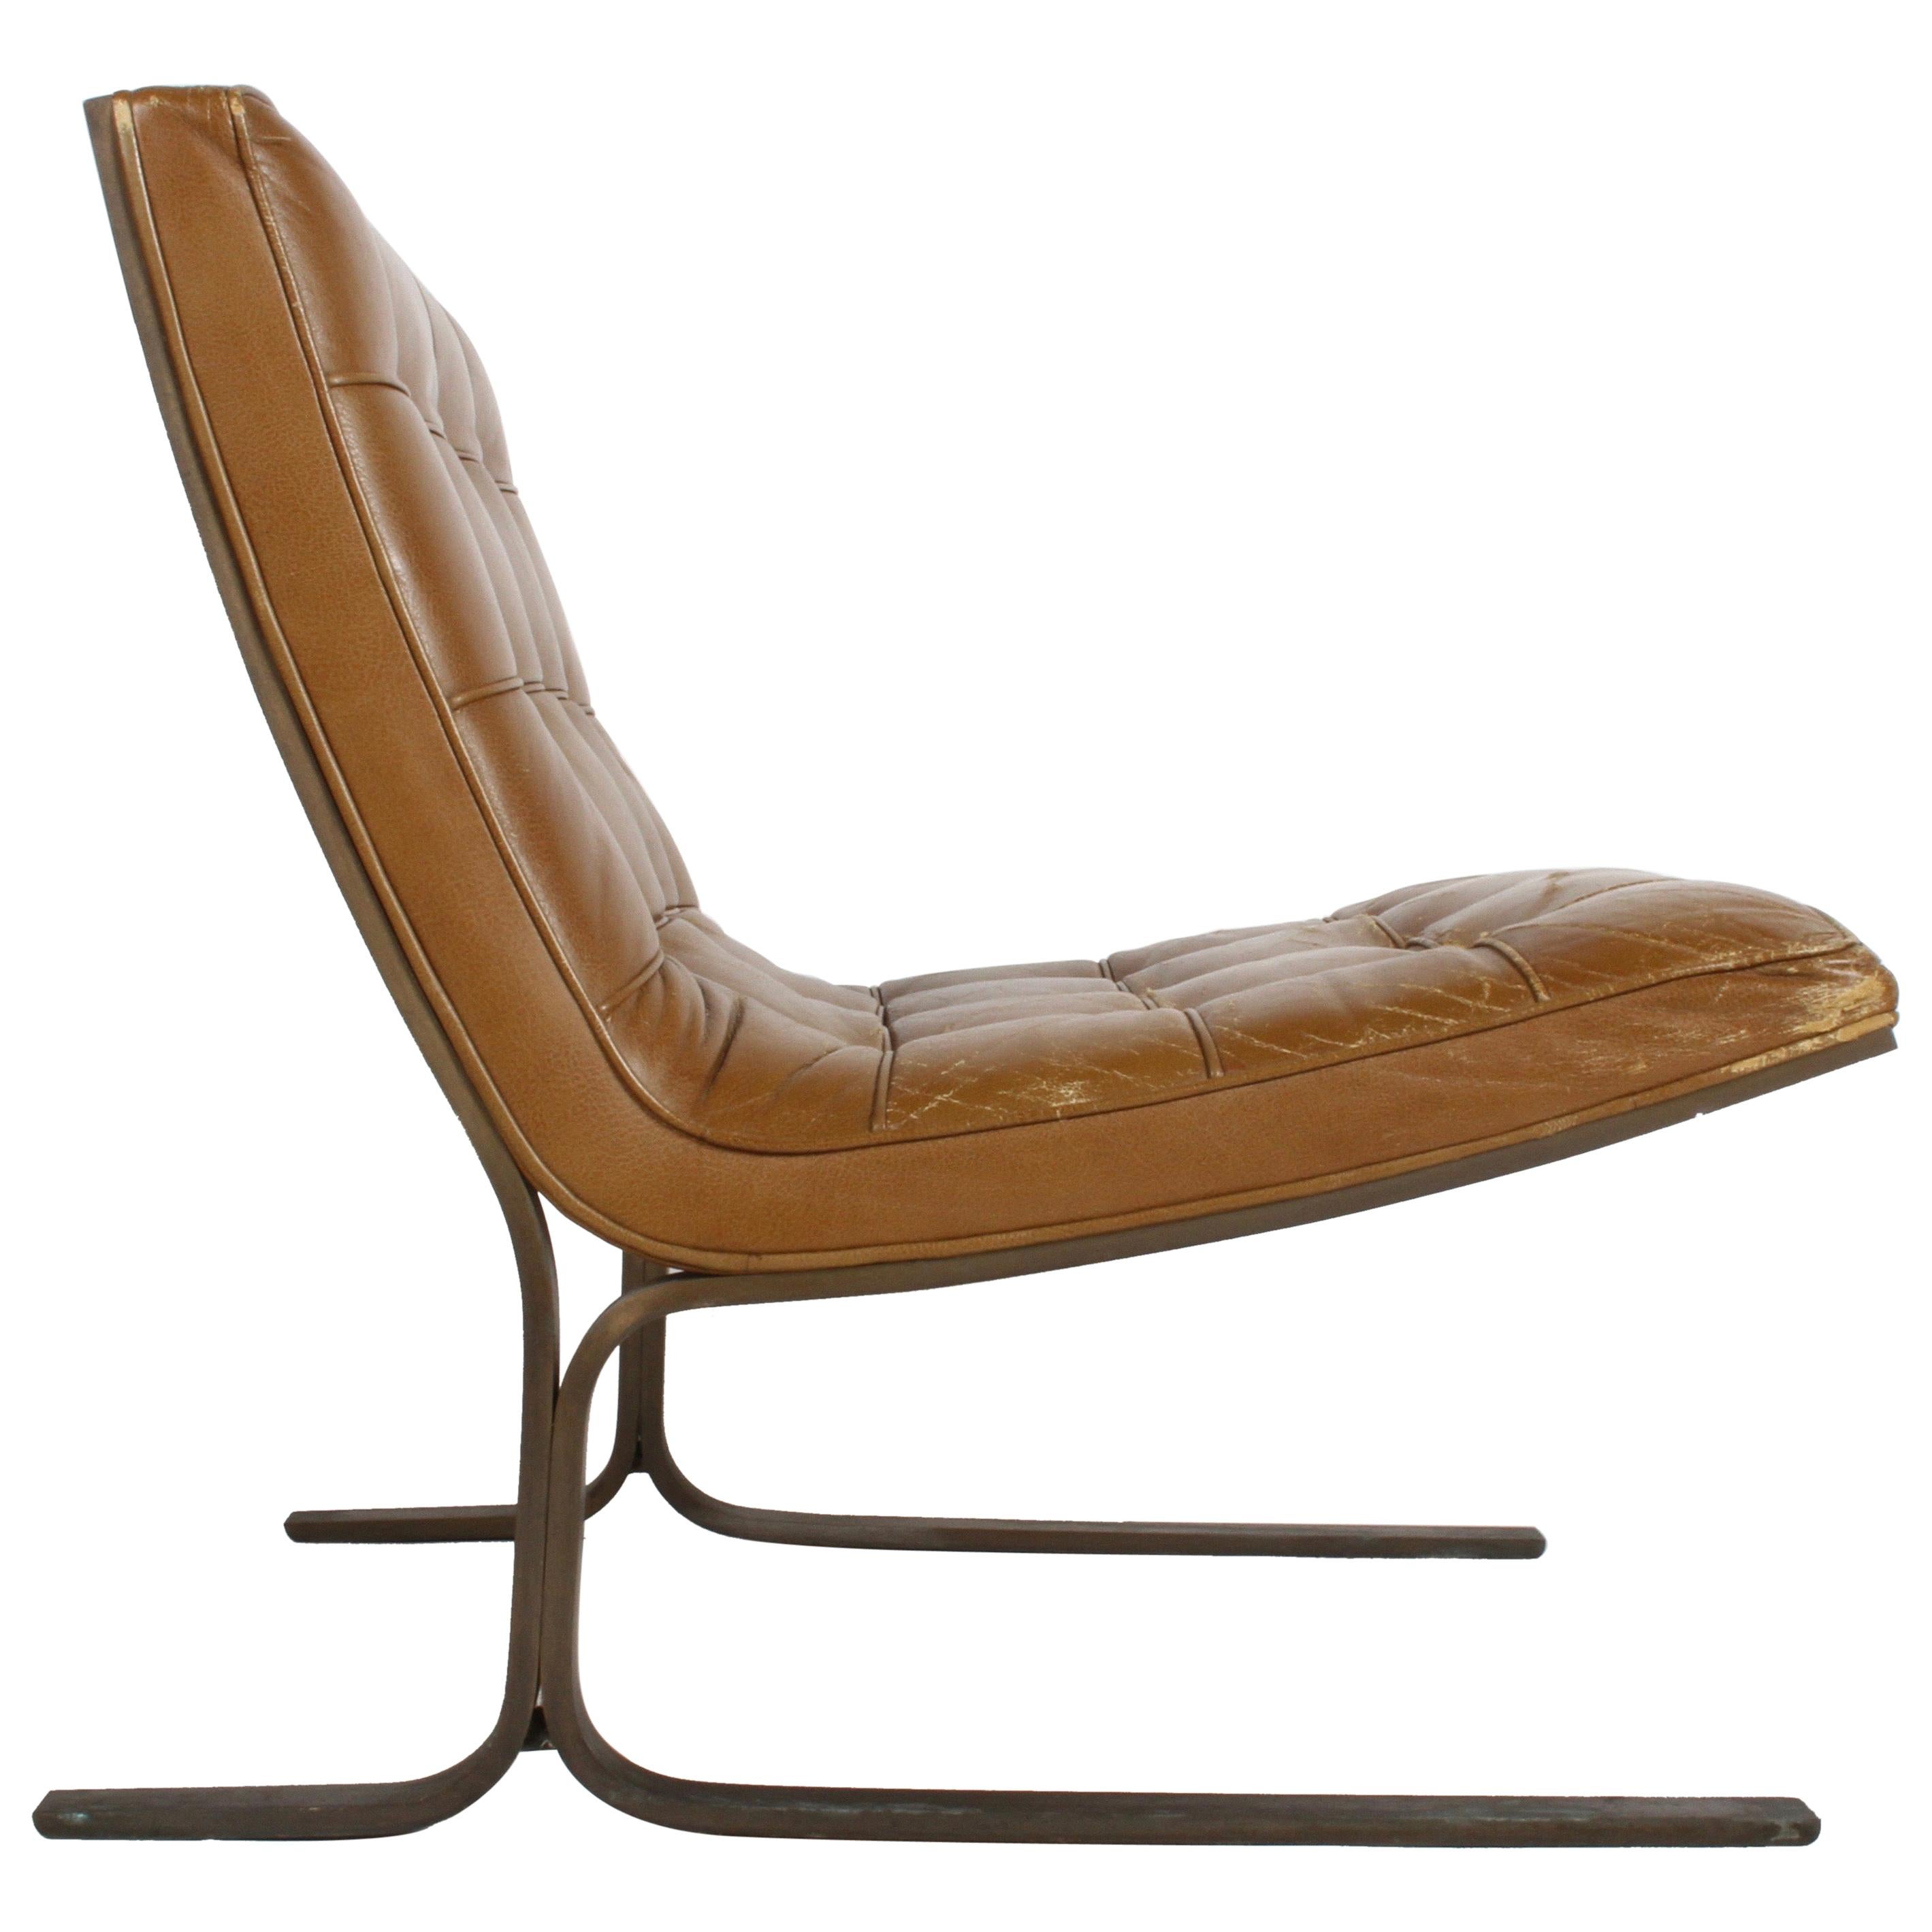 Nicos Zographos Cantilever Bronze Base Lounge Chair CH28 in Carmel Leather